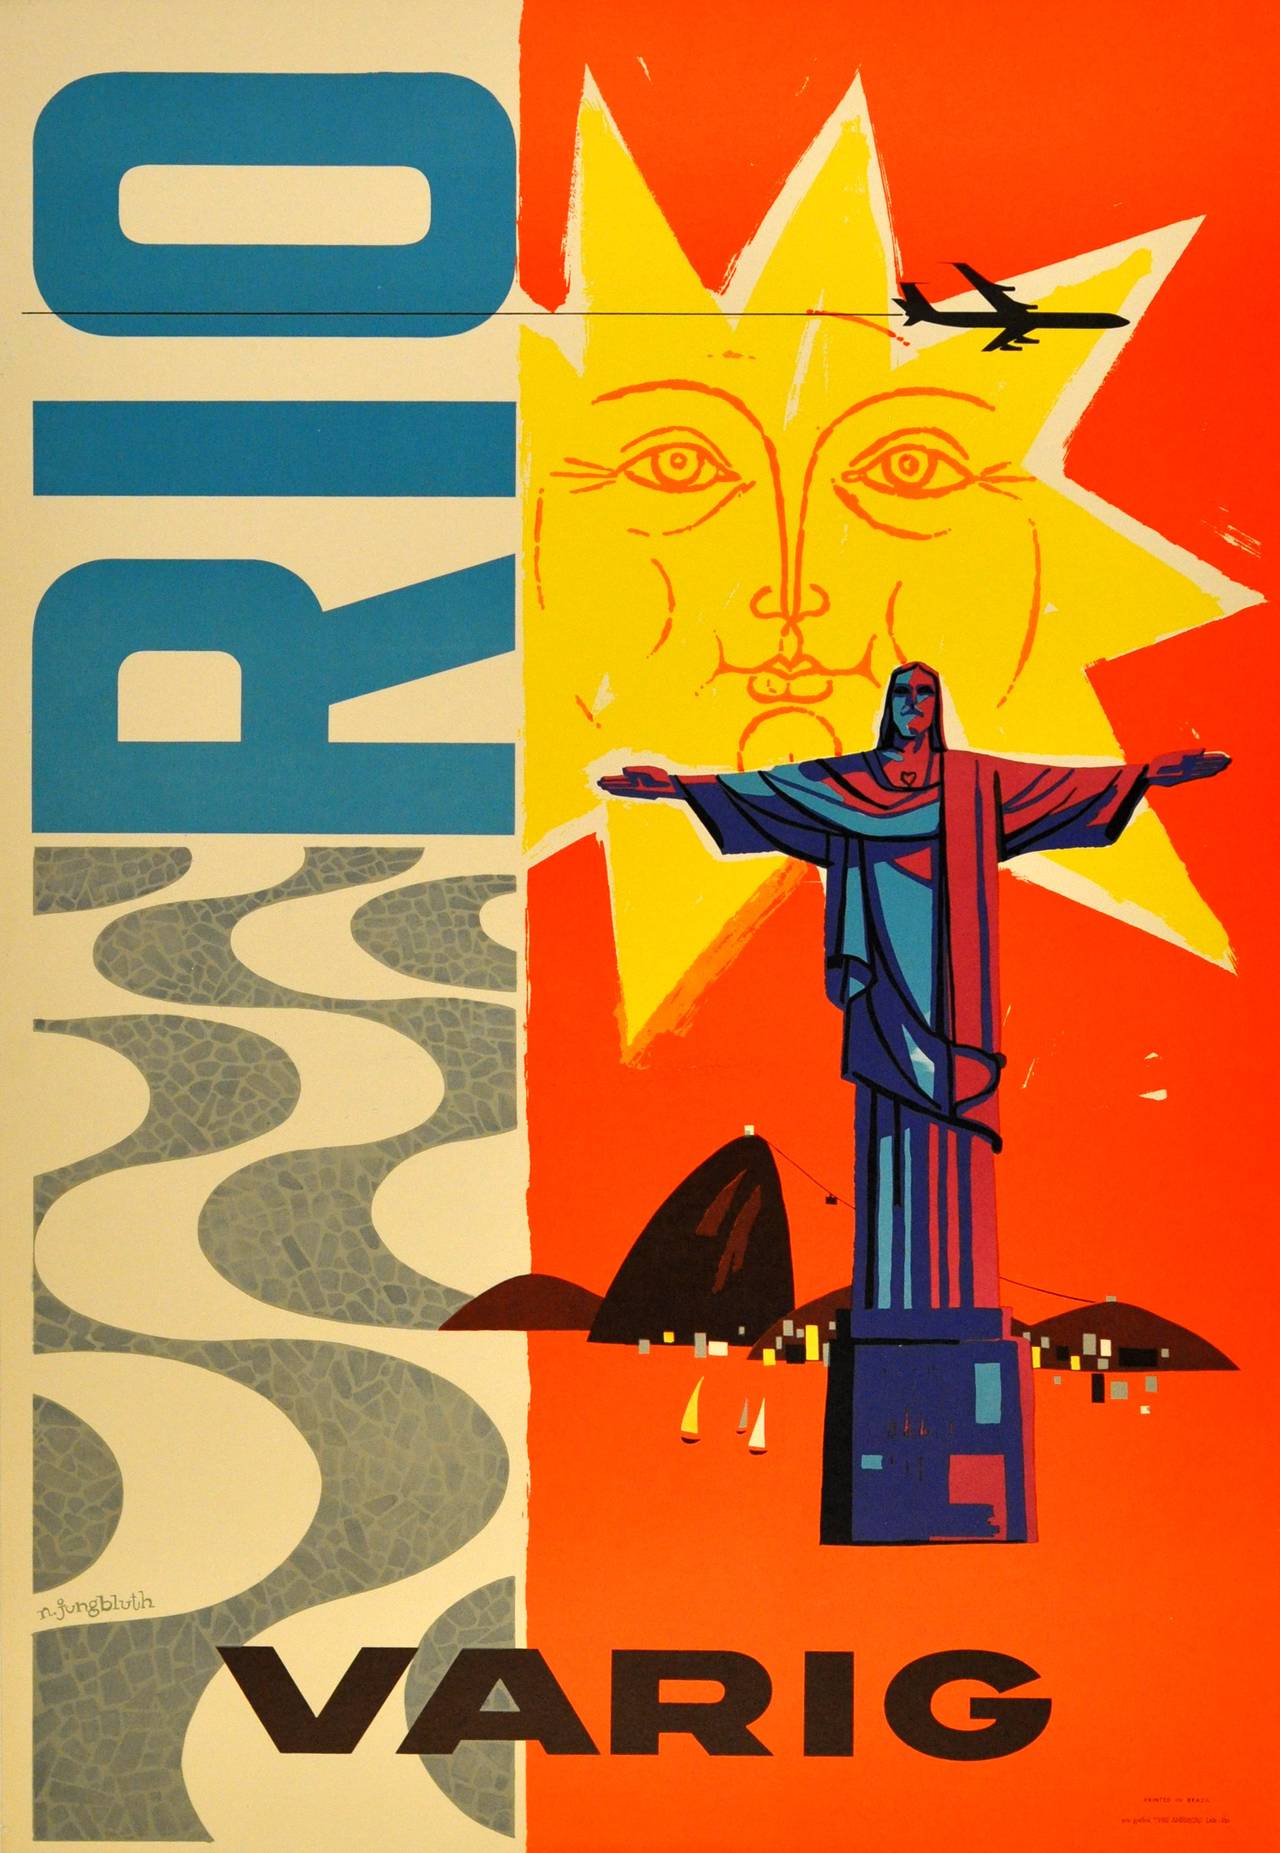 Nelson Jungbluth Print - Original Vintage Travel Advertising Poster For Rio De Janeiro By Varig Airlines